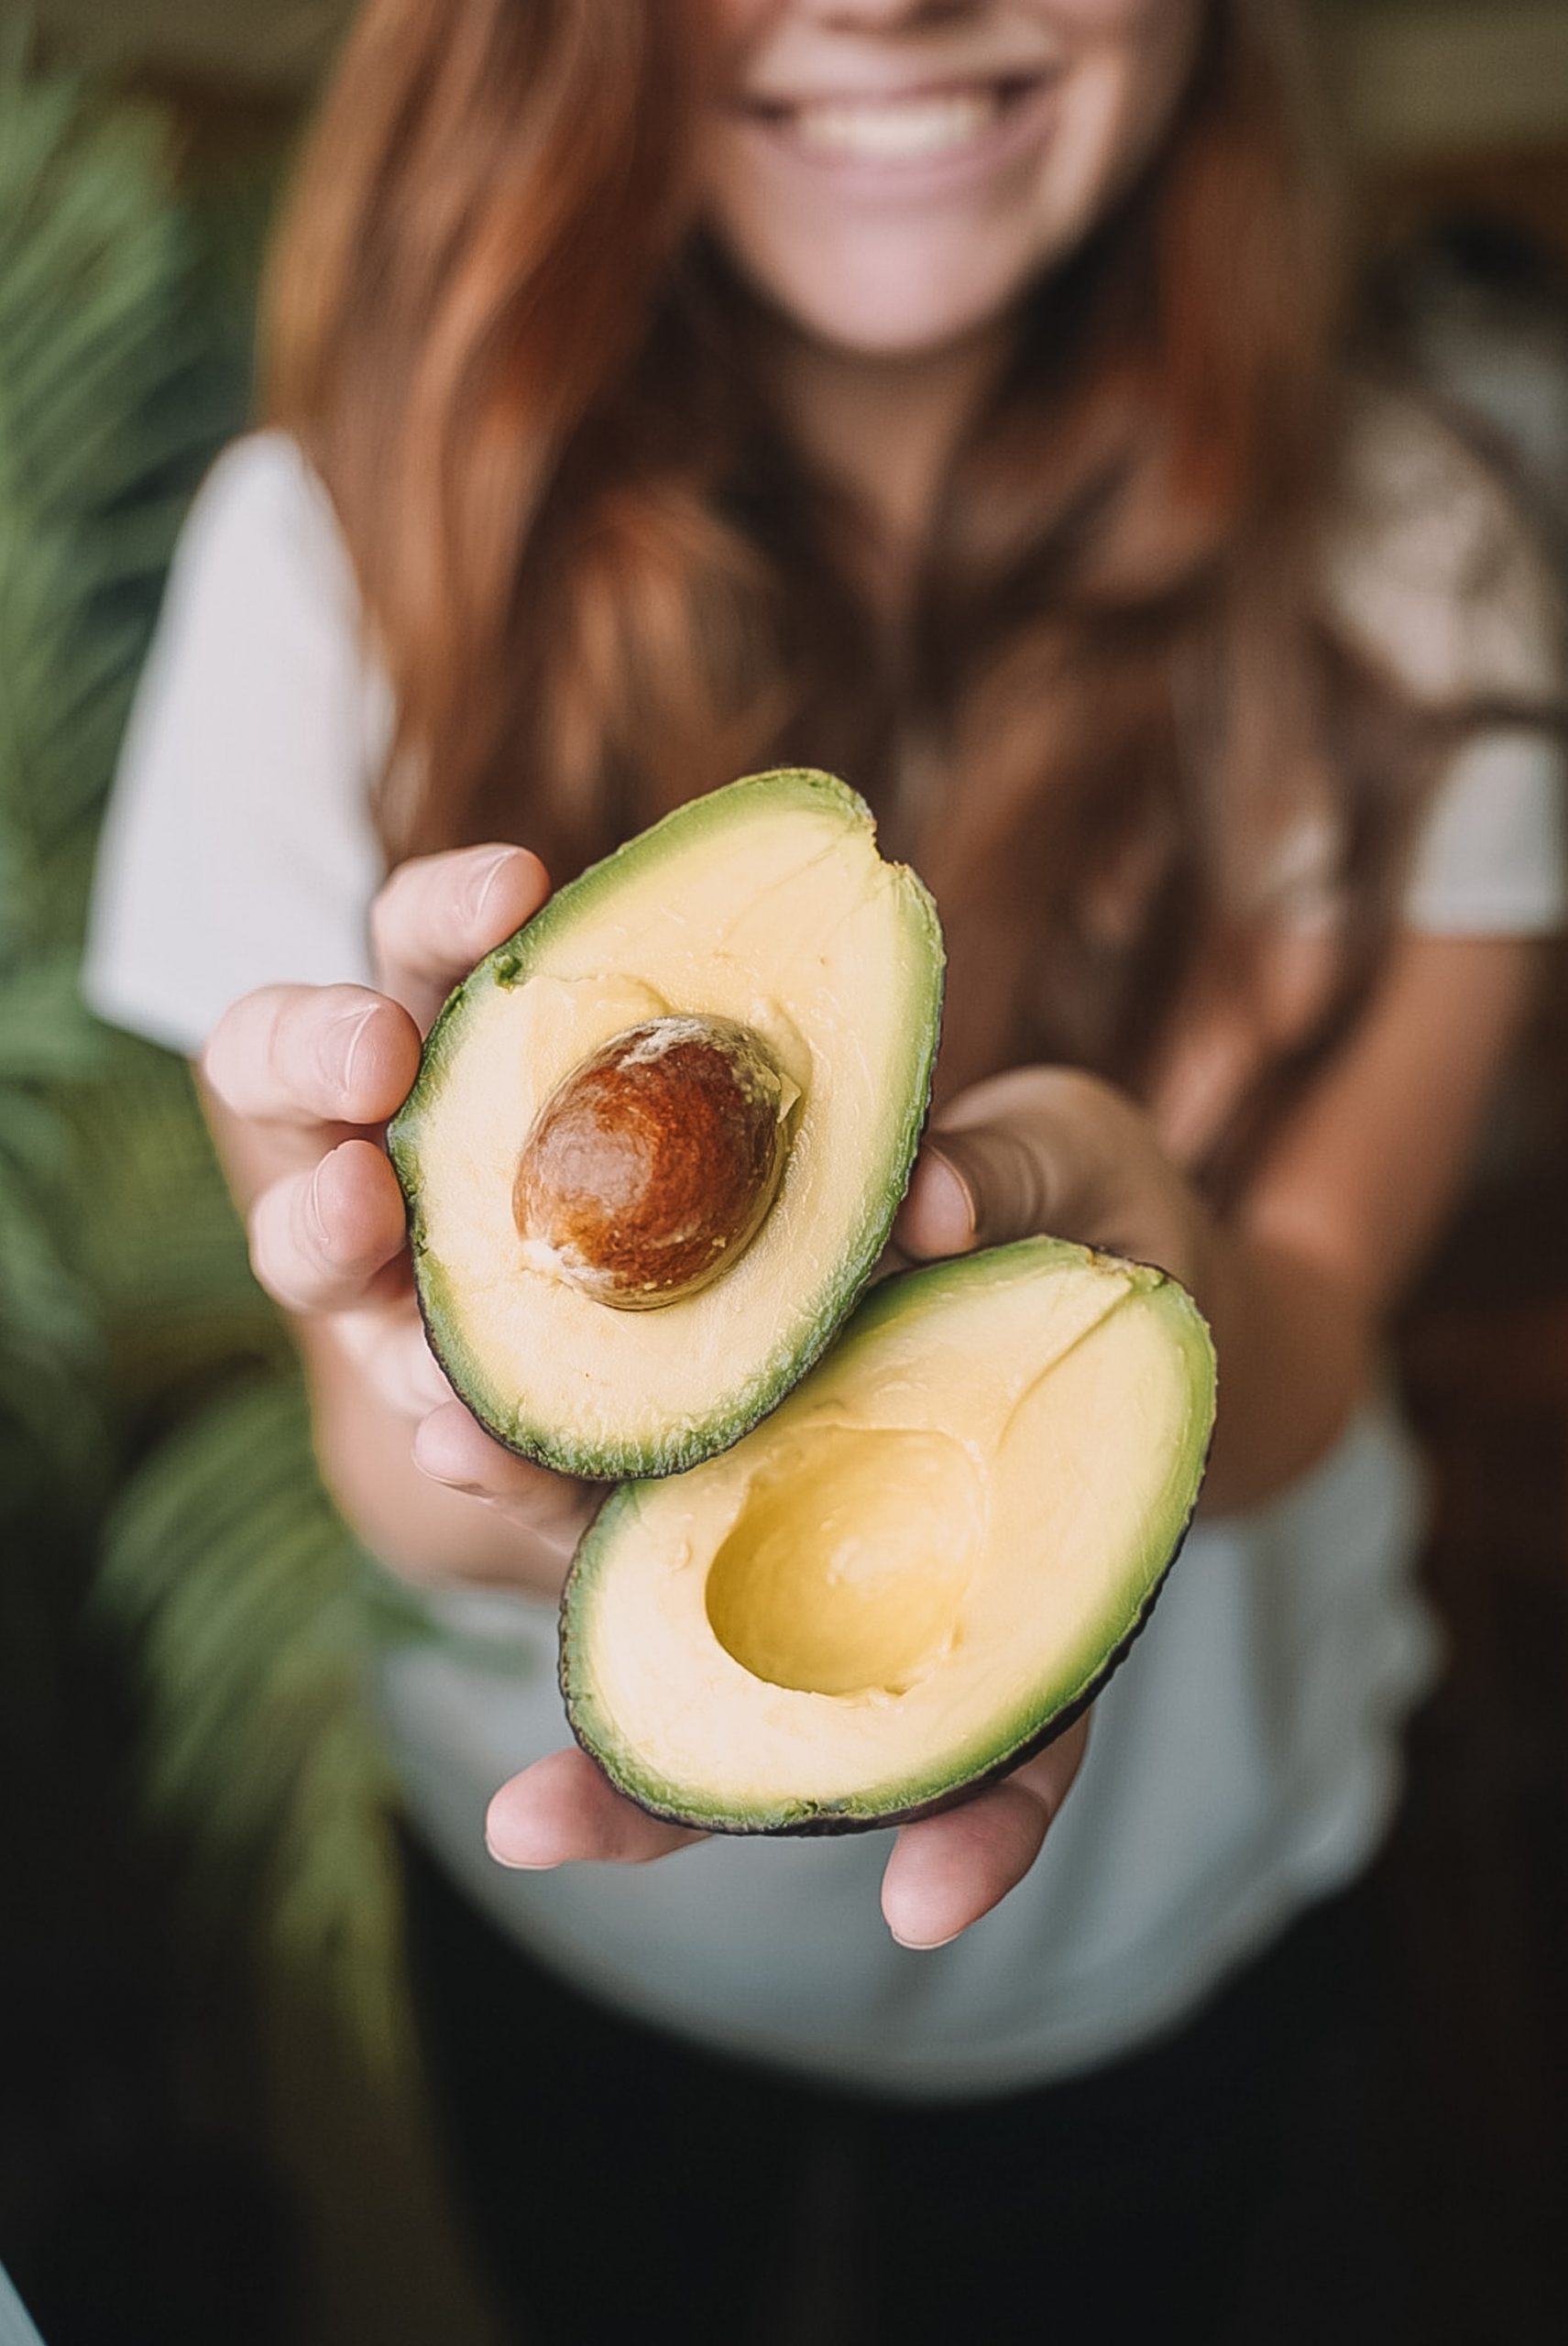 Do you know what you could use an avocado seed for?